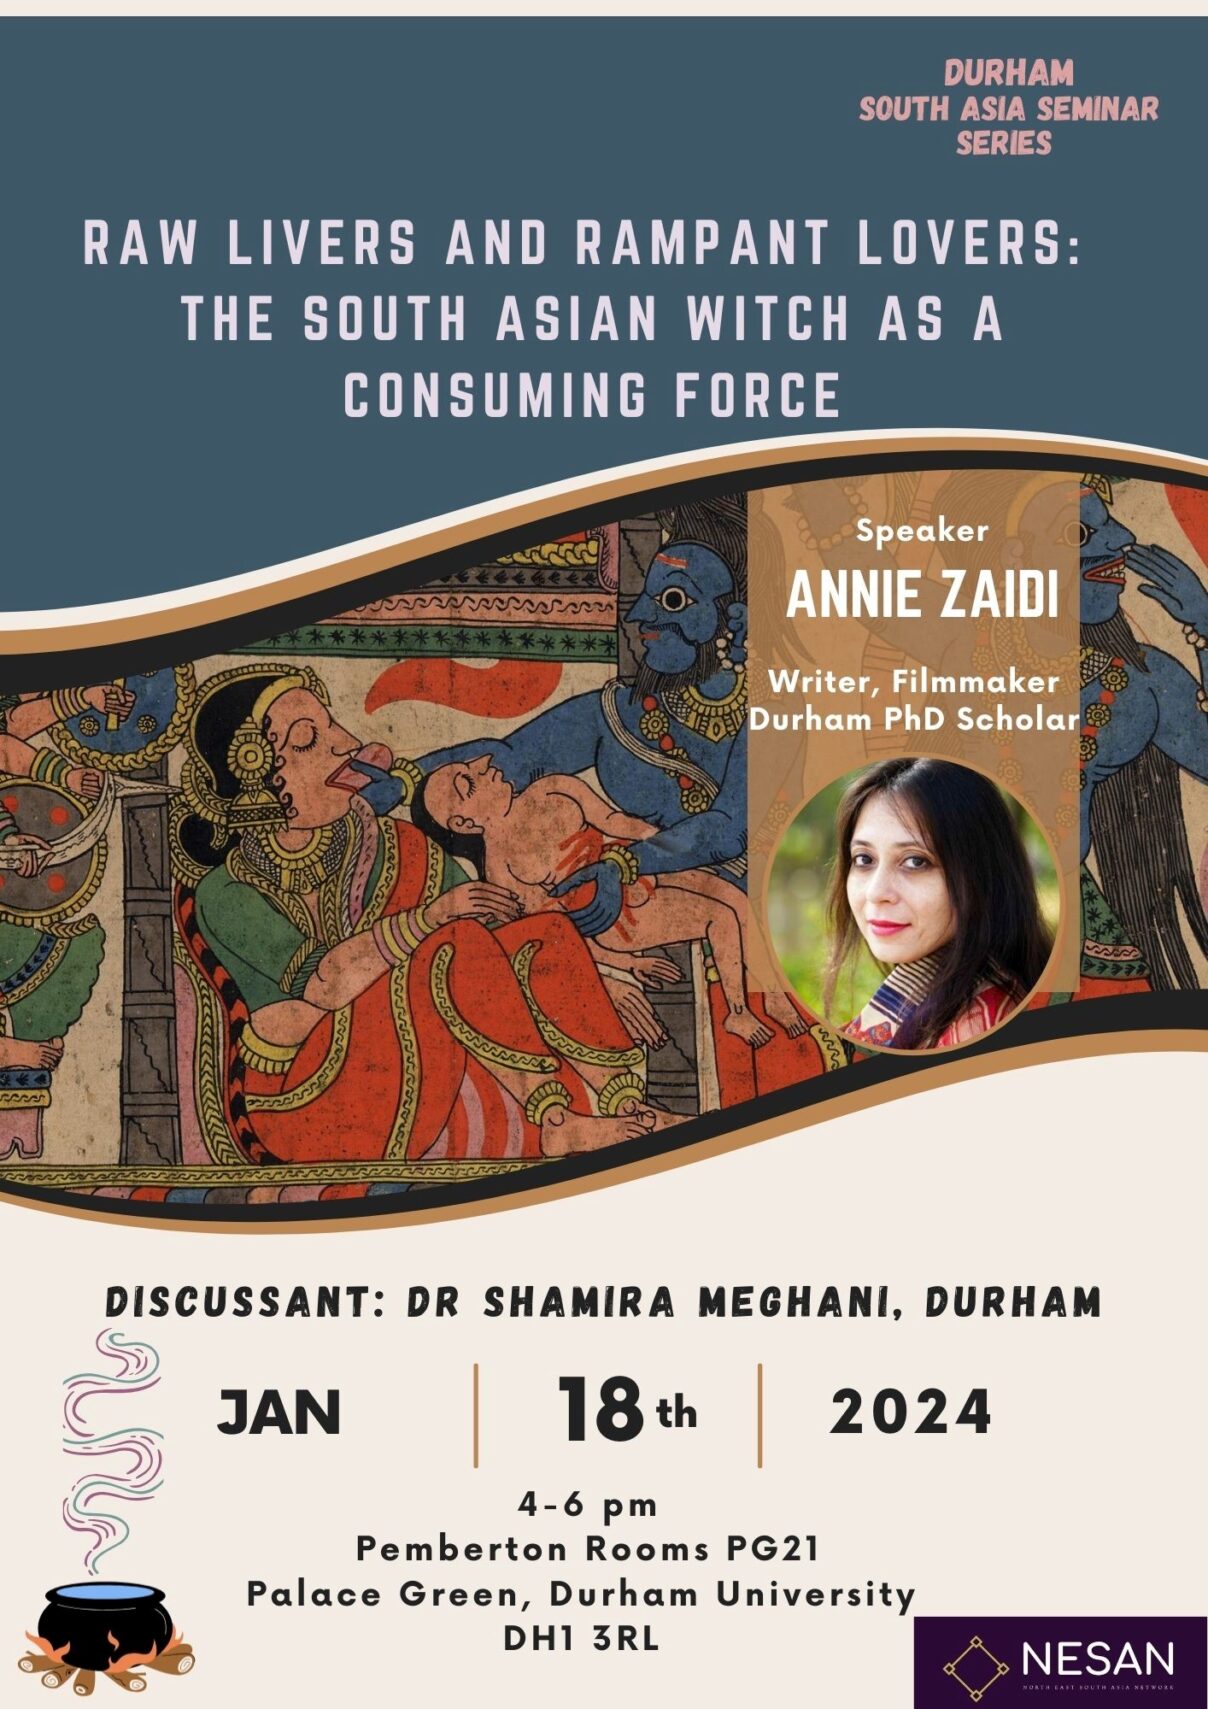 Poster advertising the event Raw Livers and Rampant Lovers: The South Asian Witch as a Consuming Force